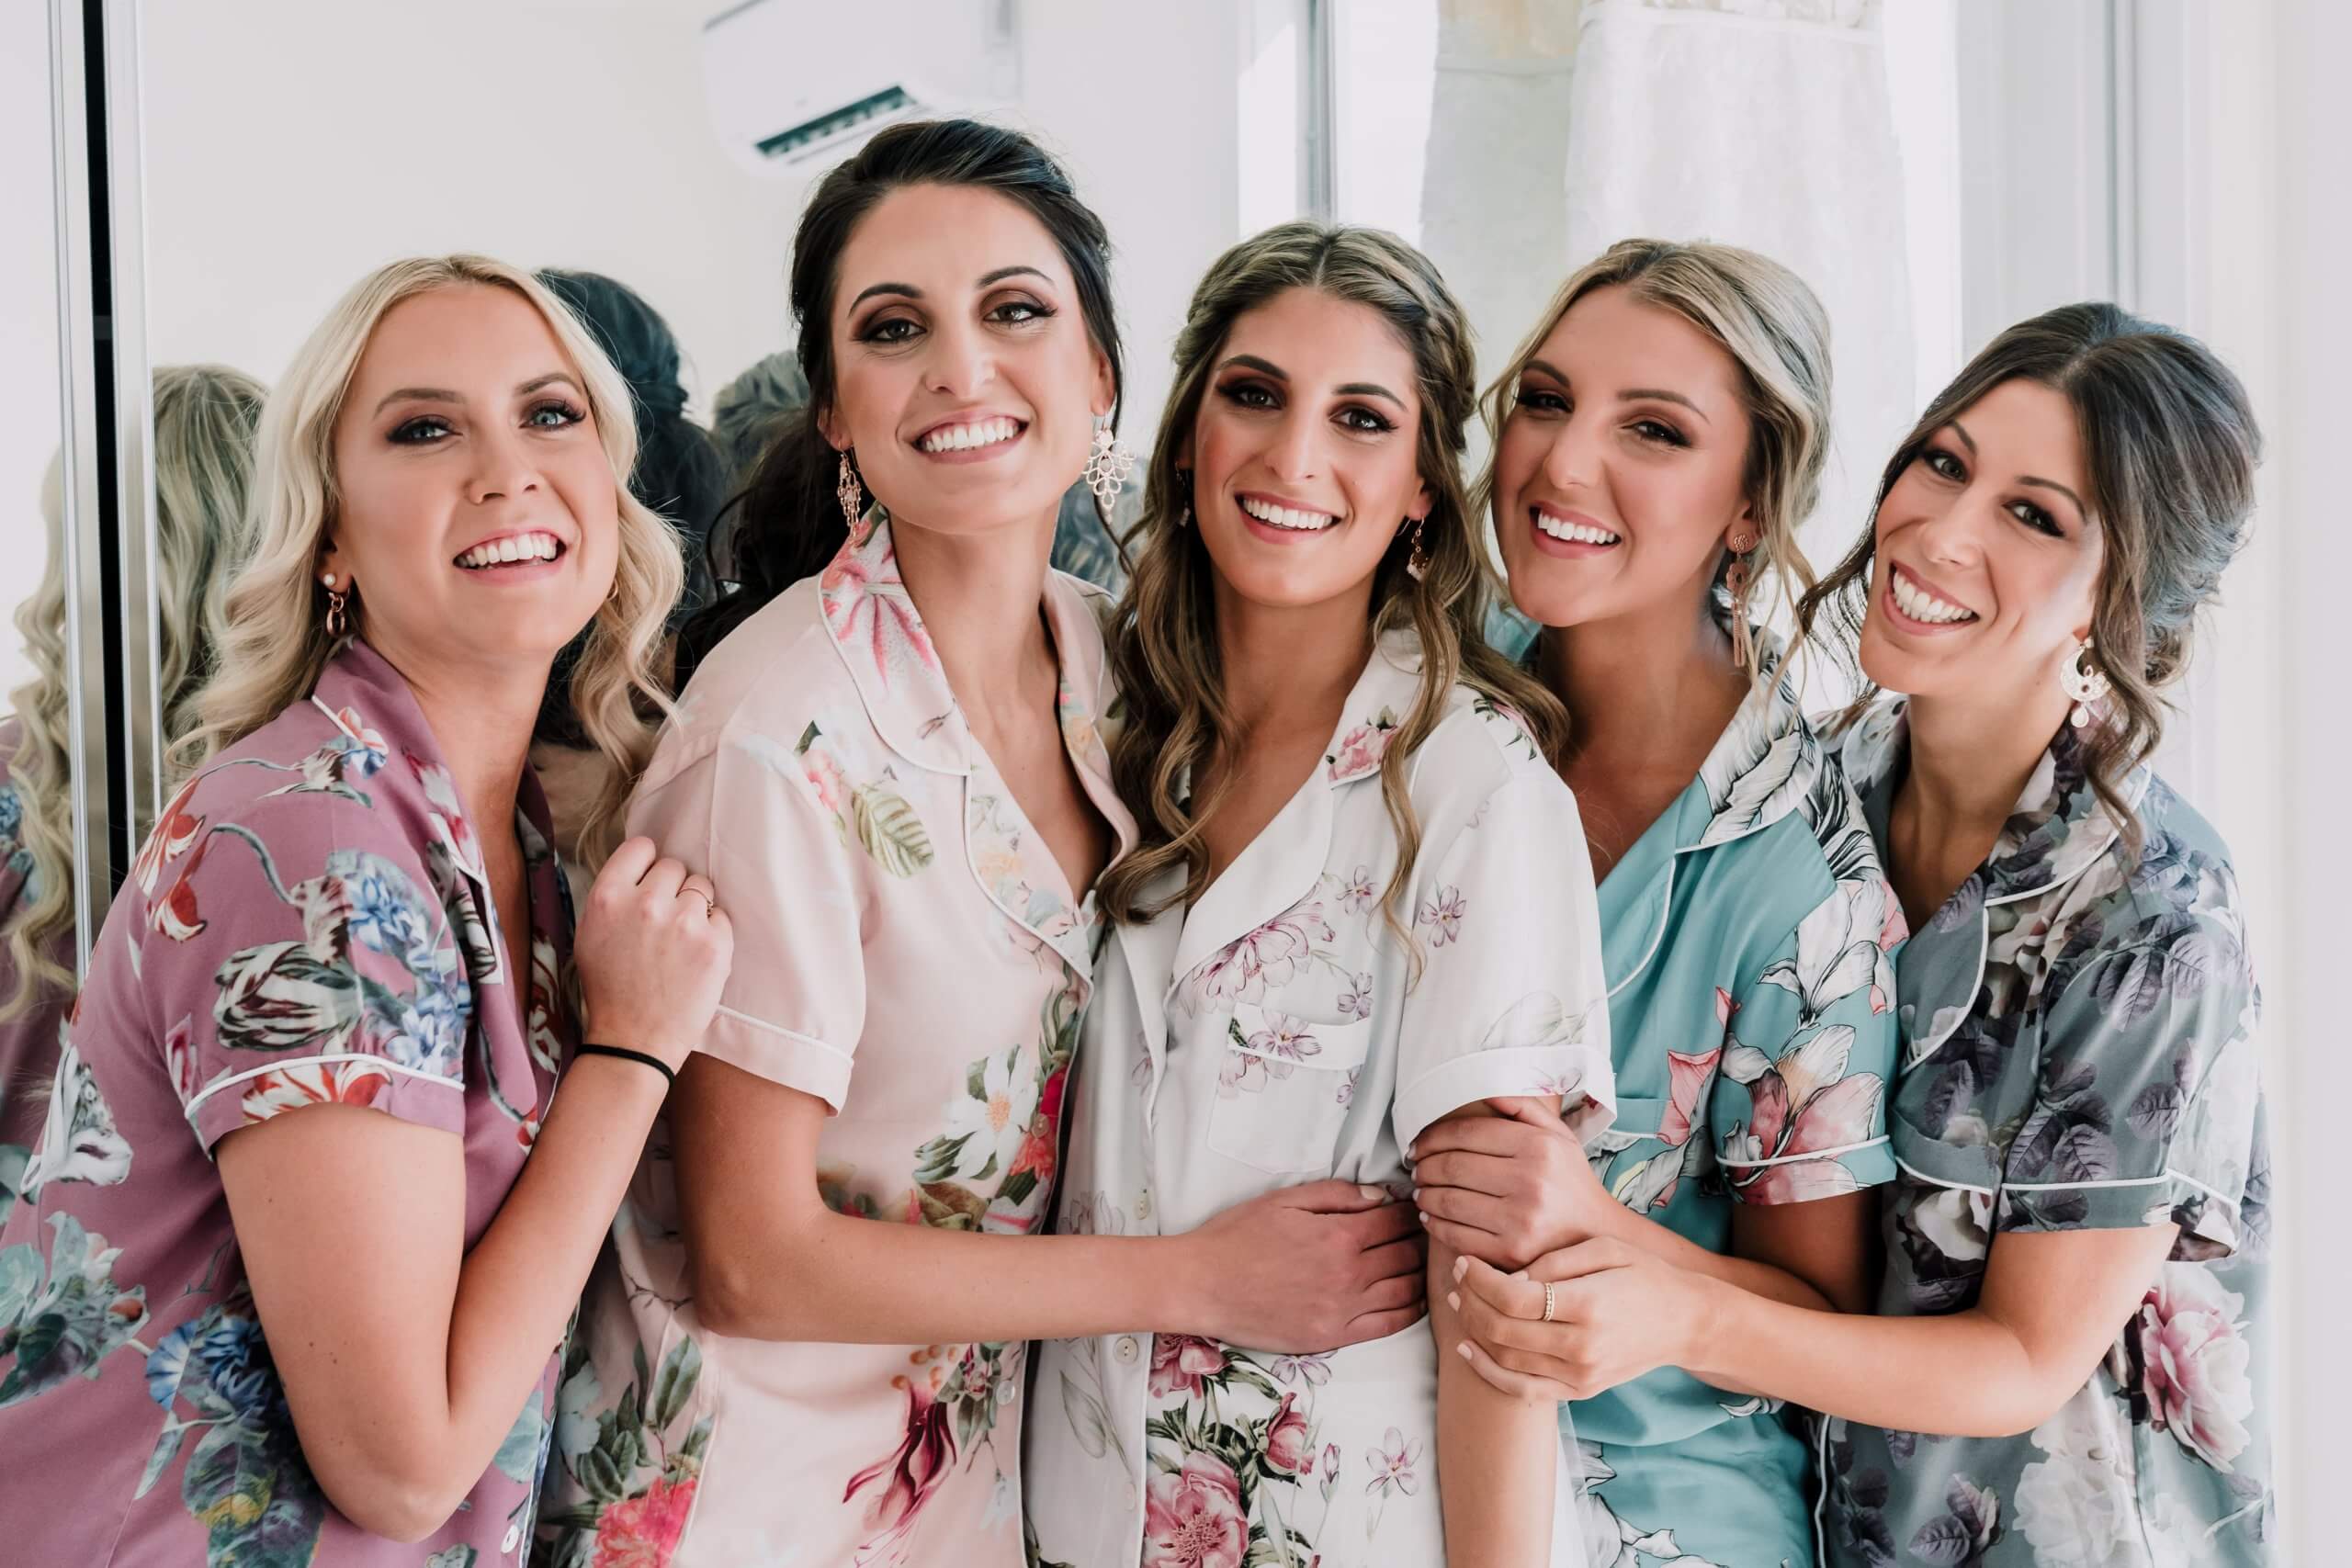 Customise Your Wedding - Bride and her bridesmaids during her getting-ready shoot, wearing matching floral pajamas.